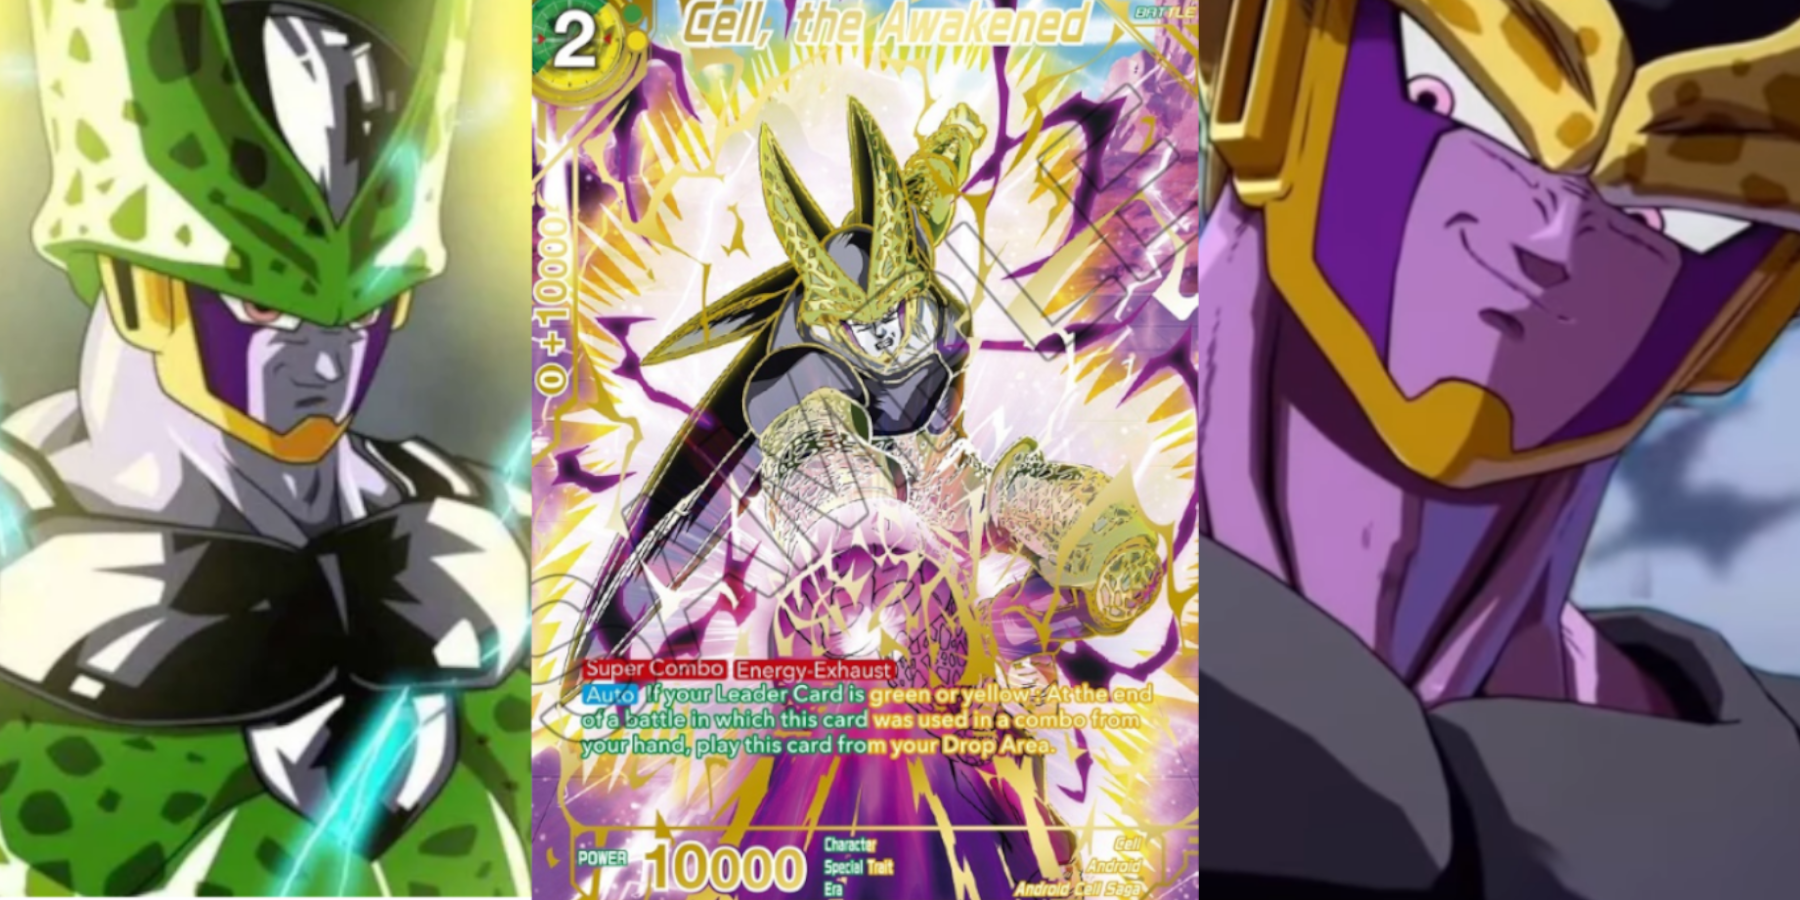 Cell, The Awakened Dragon Ball Super Card Game